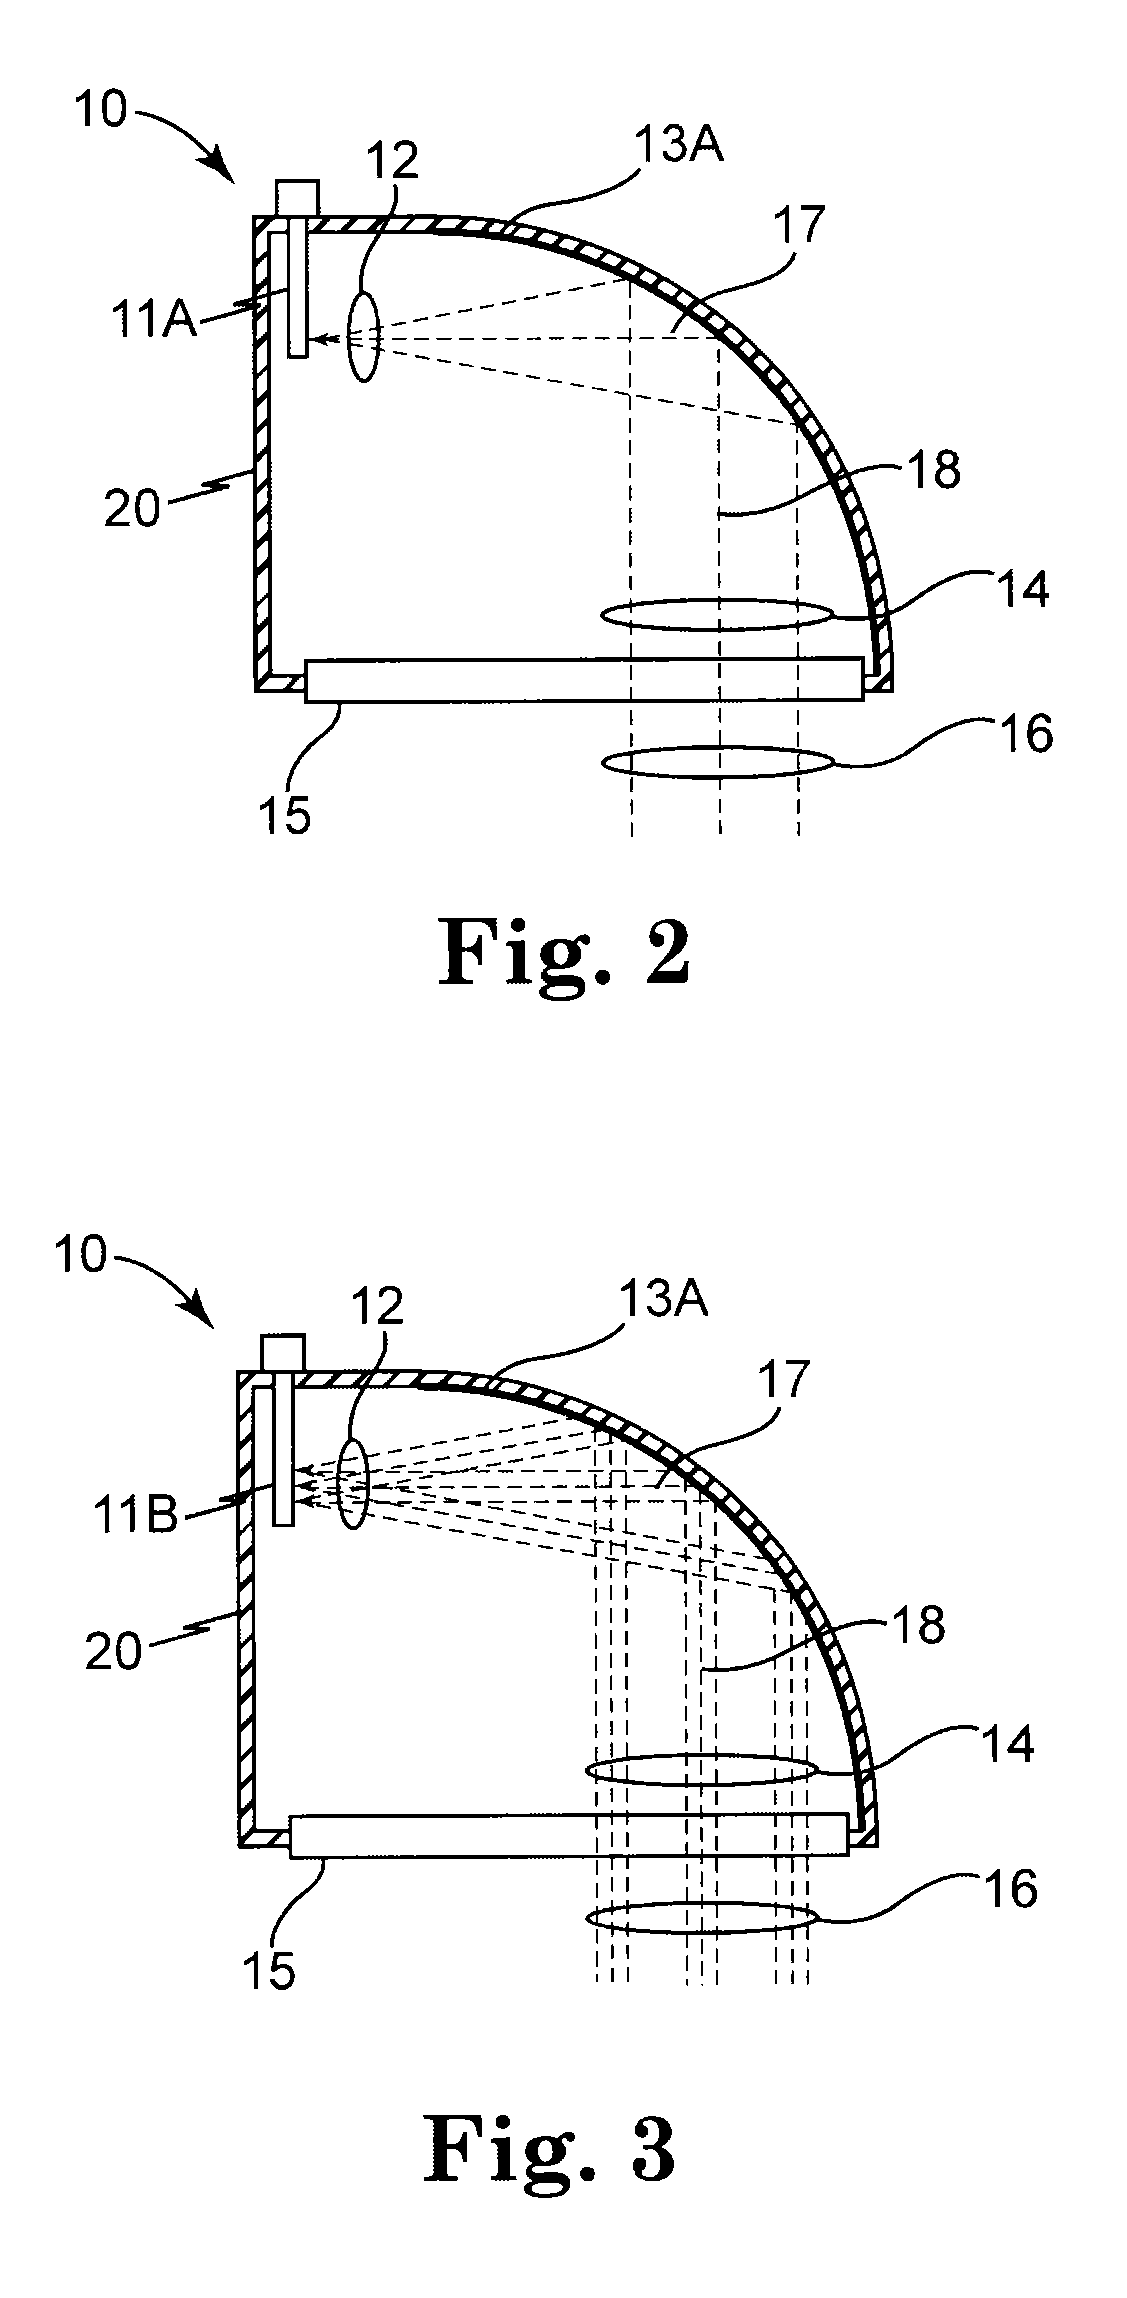 Rear-loaded light emitting diode module for automotive rear combination lamps